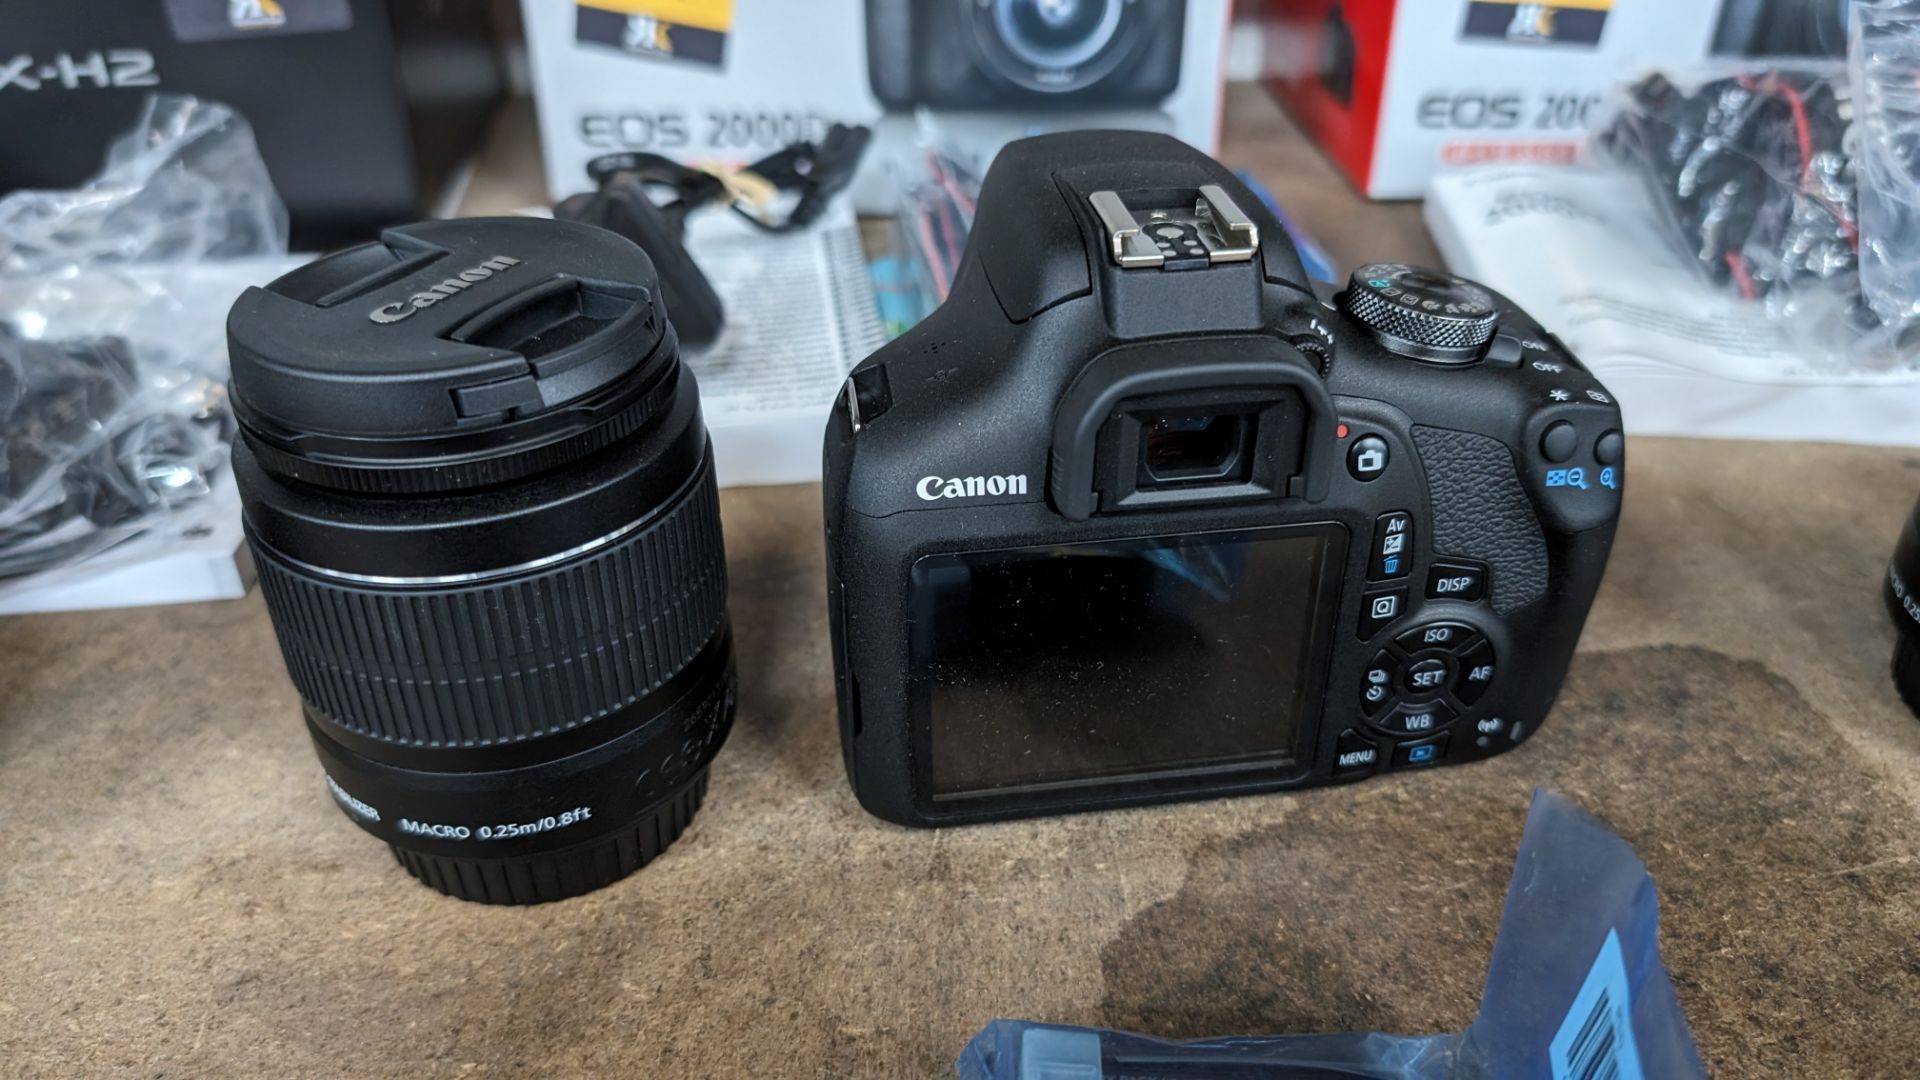 Canon EOS 2000D camera with EFS 18-55mm lens plus battery, charger, strap and more - Image 9 of 16